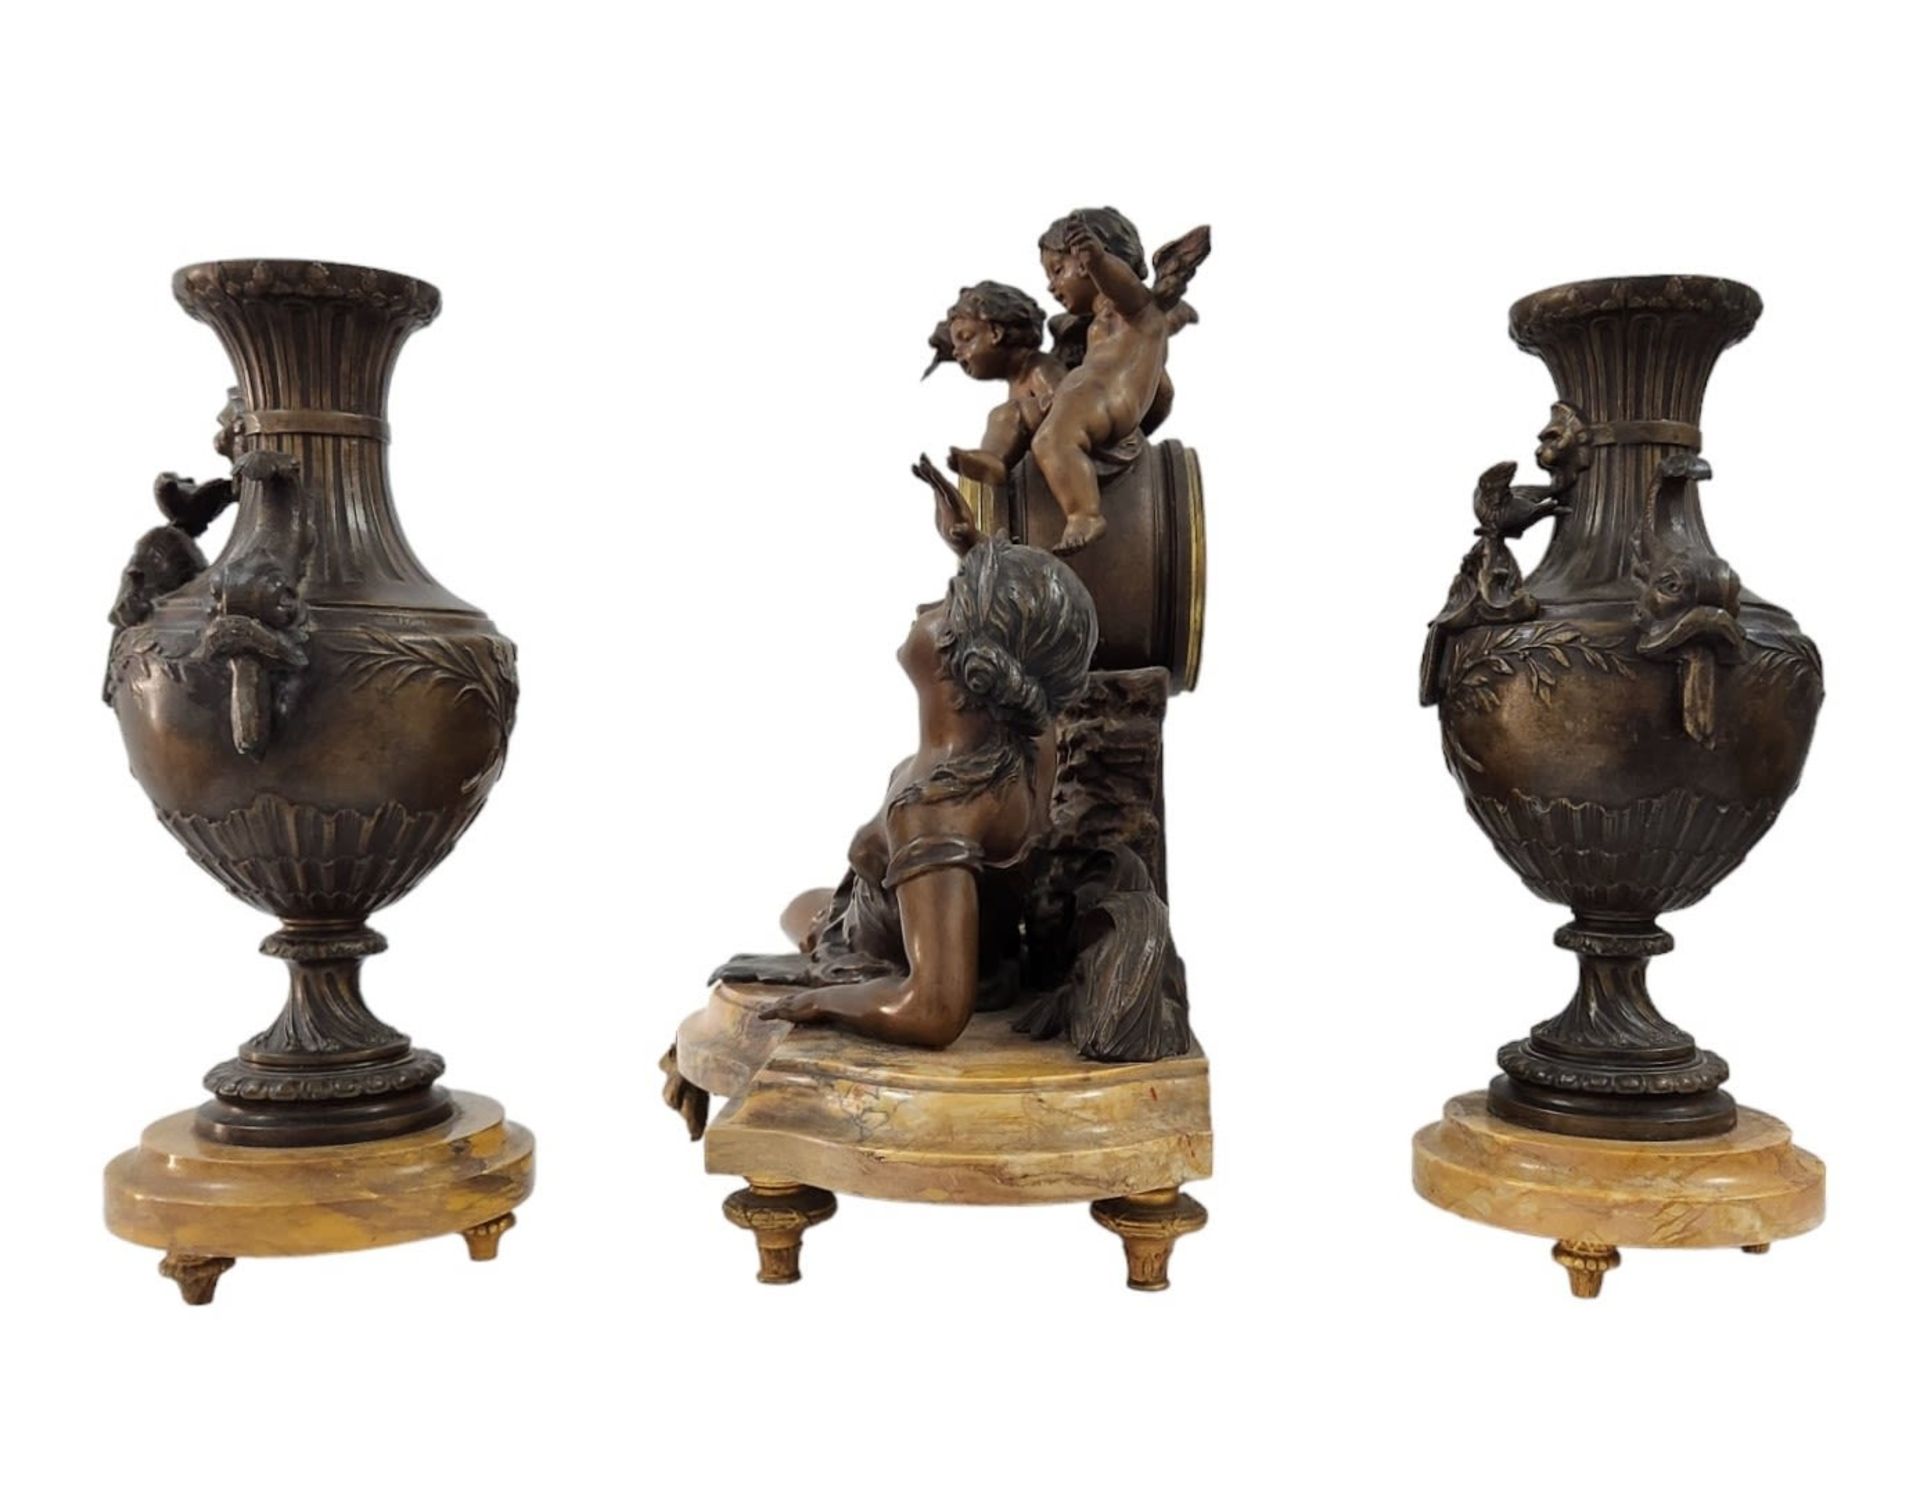 'Angels surprising a Nymph' - Antique French Mantel Clock, large and magnificent, made of spelter - Bild 3 aus 11